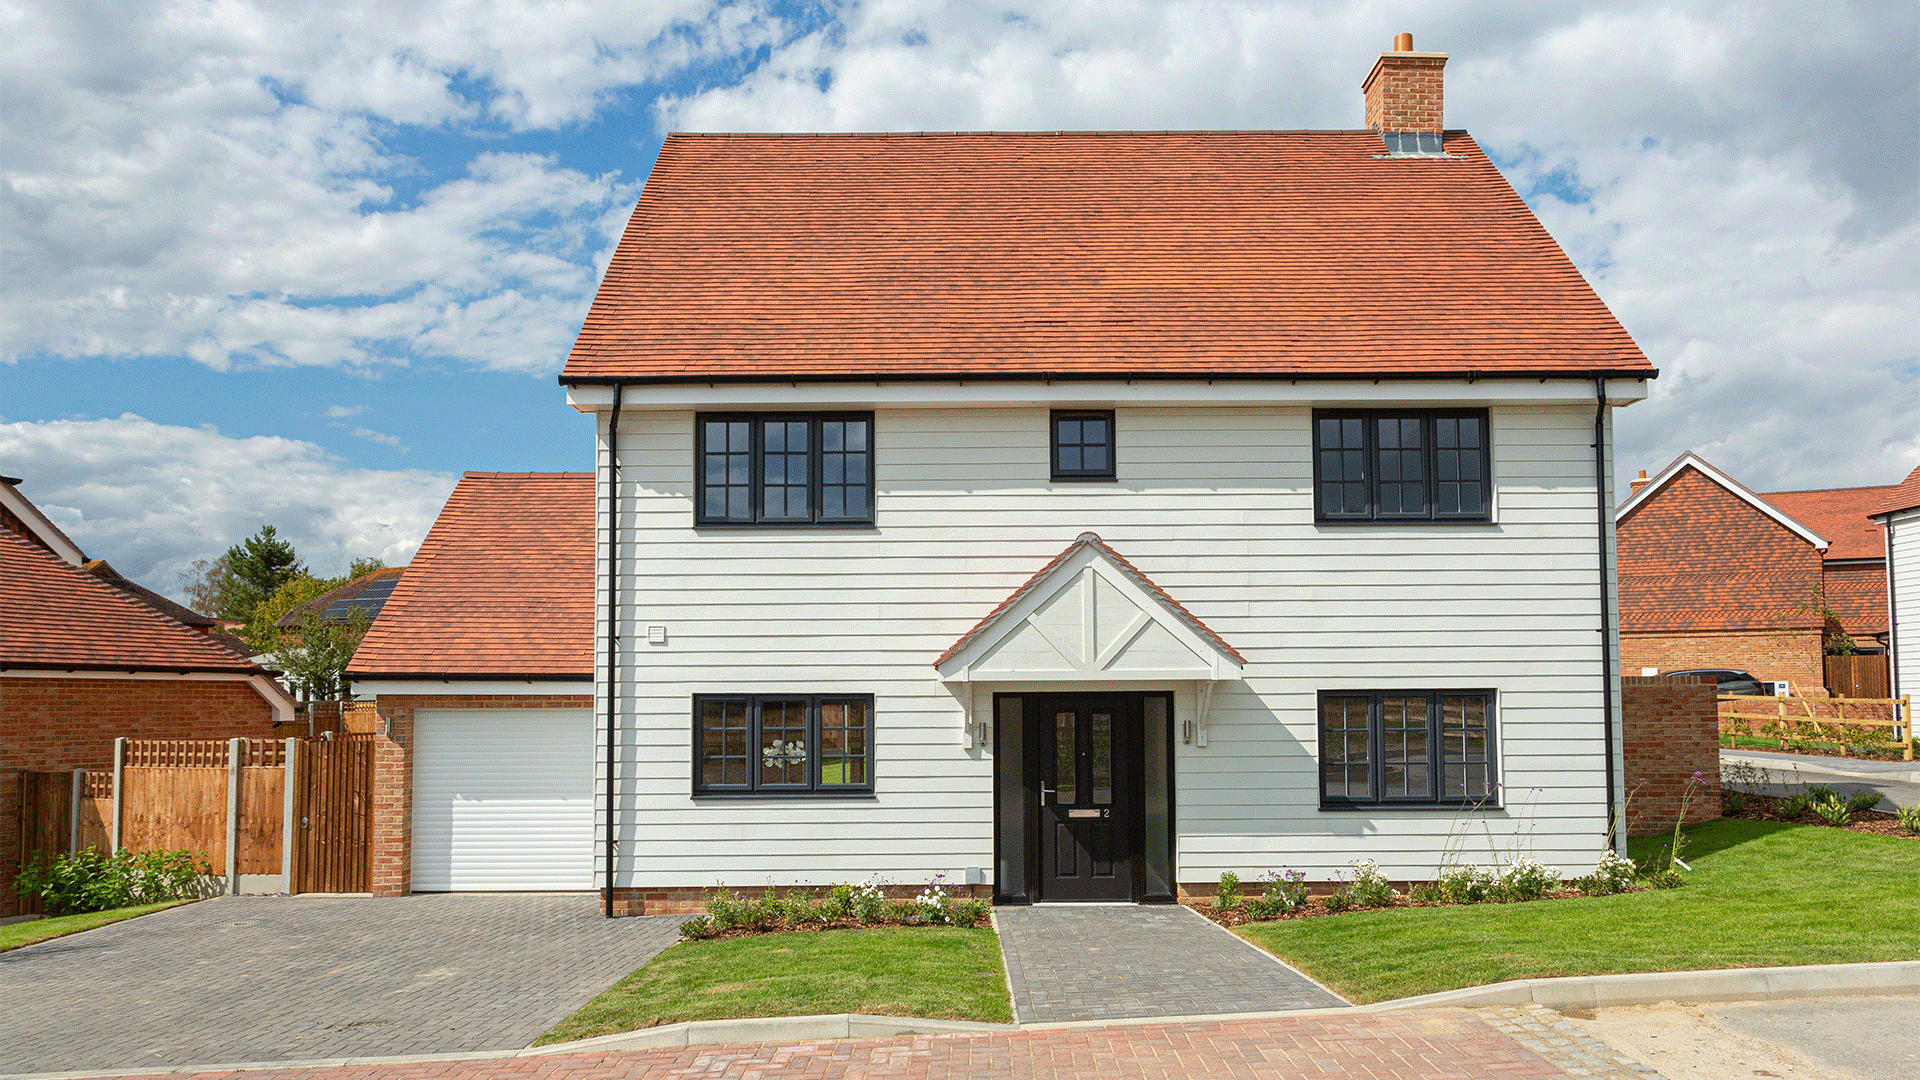 3 bedroom detached house at Miller's Meadow